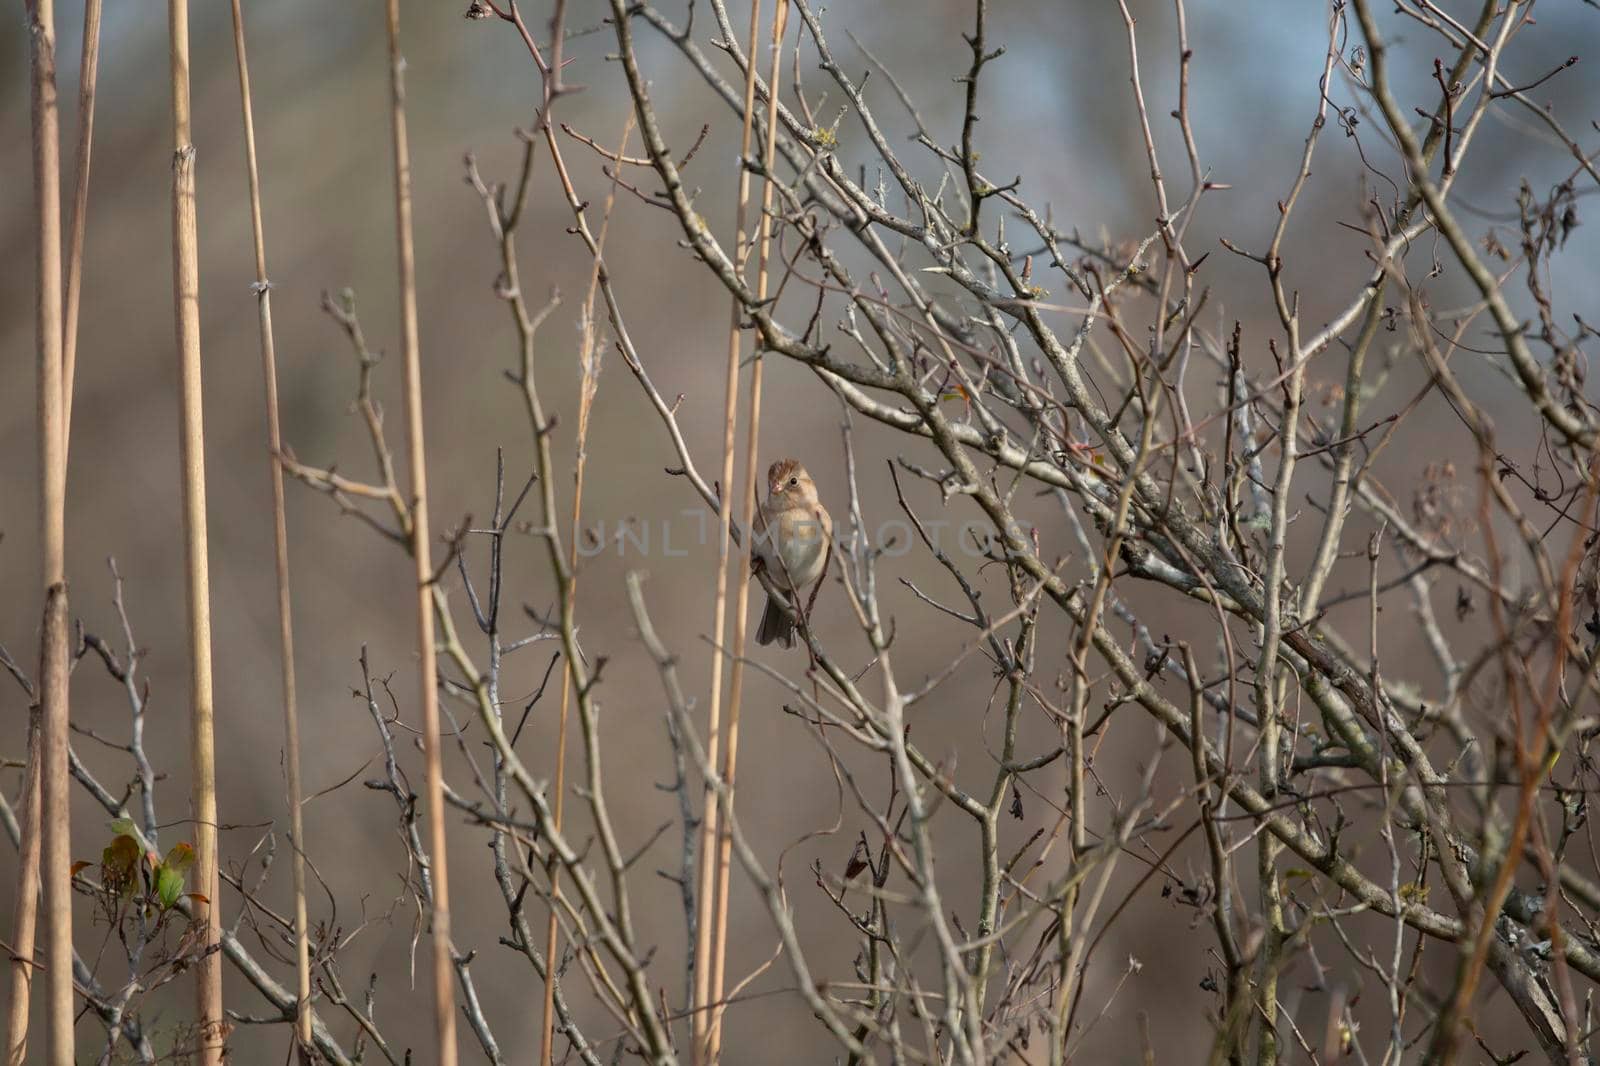 Field sparrow (Spizella pusilla) snacking while perched on a thin reed in a field